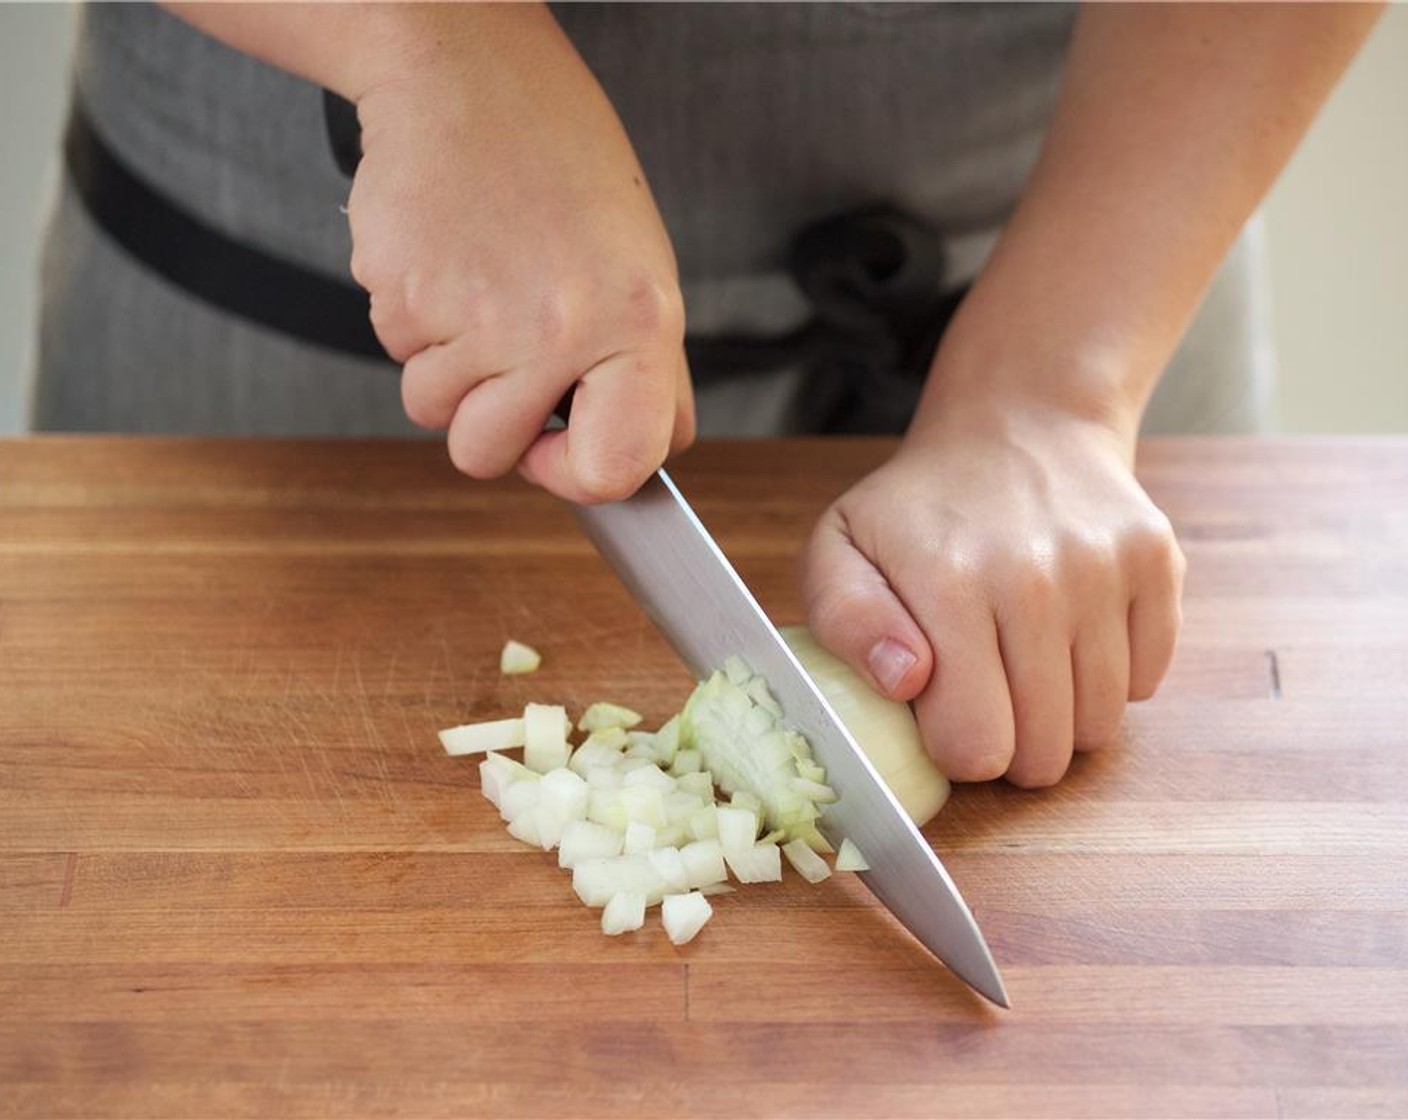 step 2 Finely chop Garlic (2 cloves) and set aside. Cut the Romaine Lettuce (2 pieces) into quarter inch thin slices, and set aside. Remove the stems from the Fresh Oregano (1 tsp) leaves, and discard stems. Roughly chop one teaspoon of leaves and set aside.